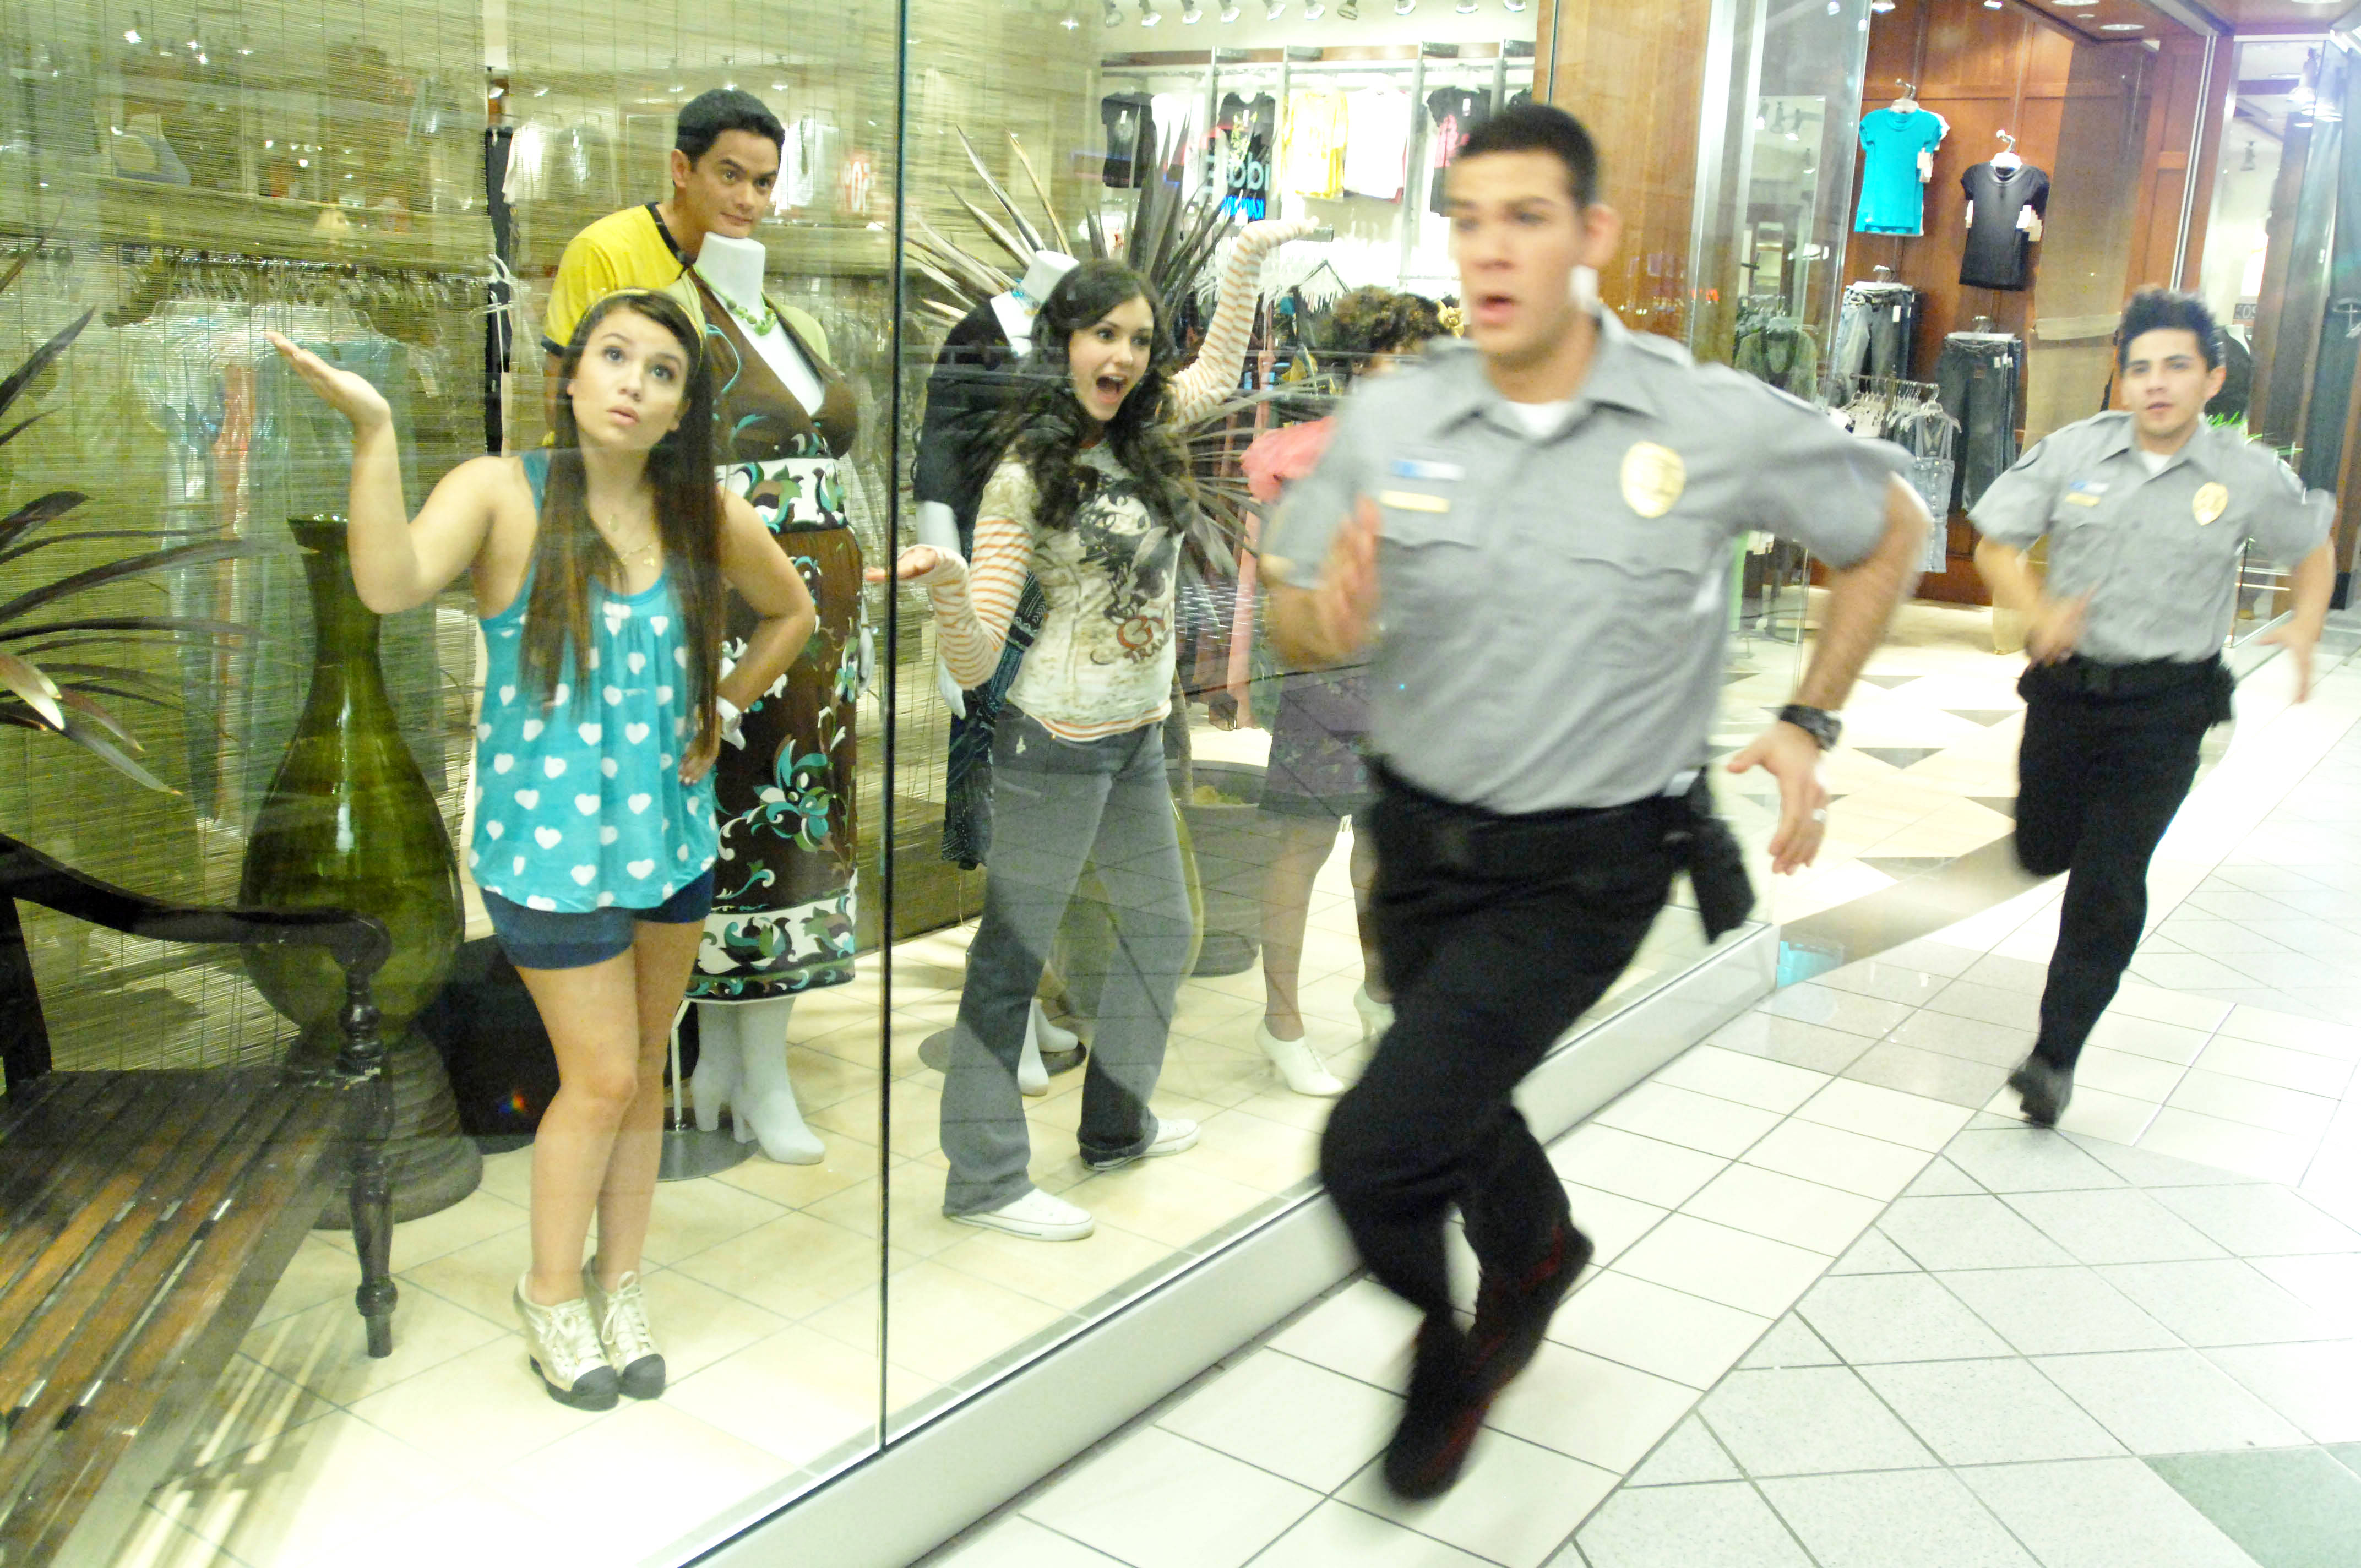 Ally (Nina Dobrev) and friends hide from security in The American Mall (2008)